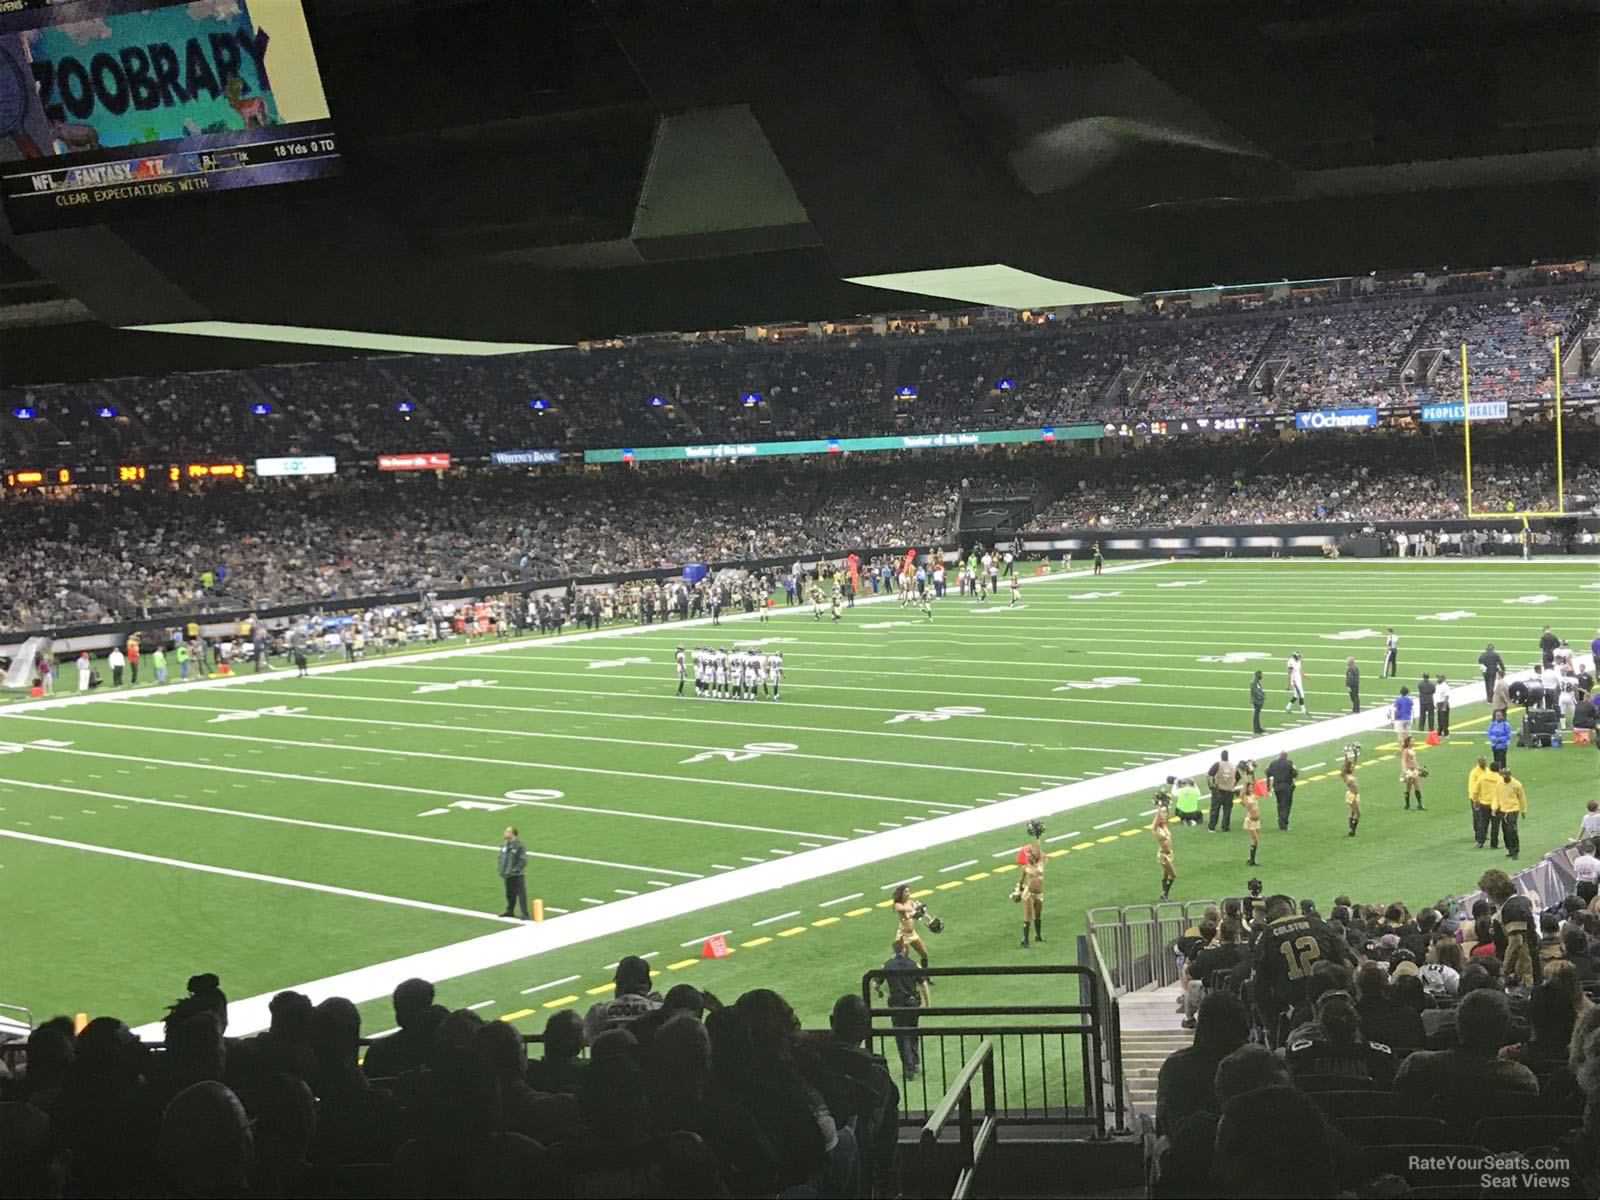 section 134, row 23 seat view  for football - caesars superdome